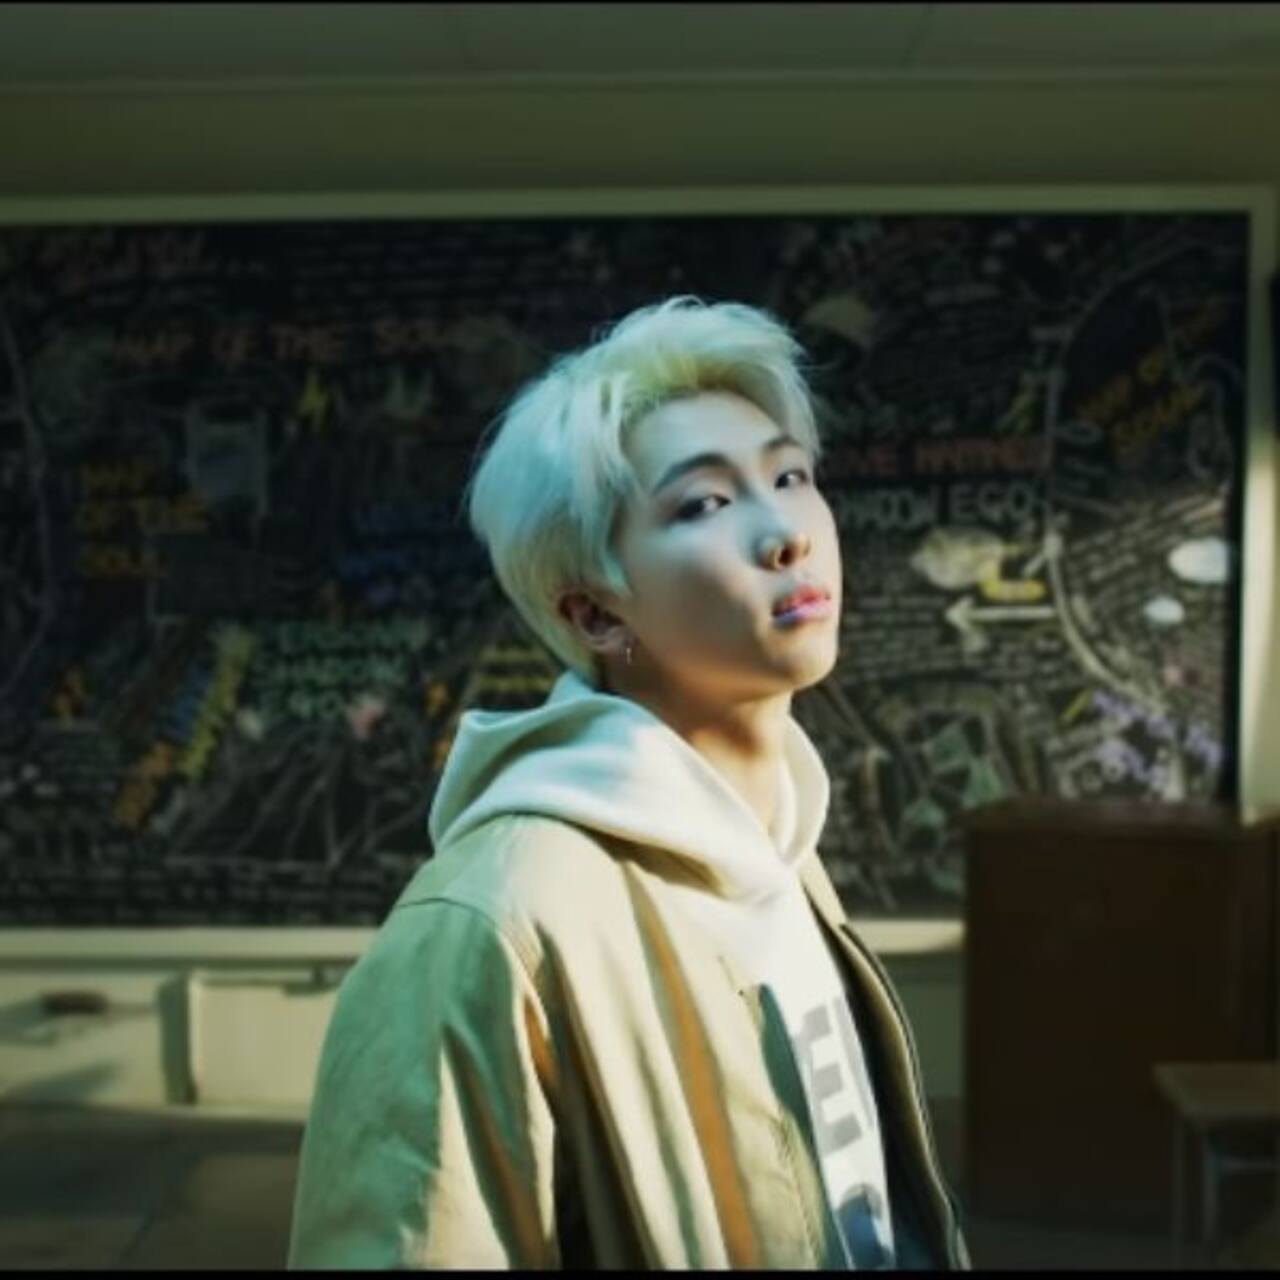 Obsessed with #PersonaChallenge? Blame it on BTS’ Map of the Soul: Persona